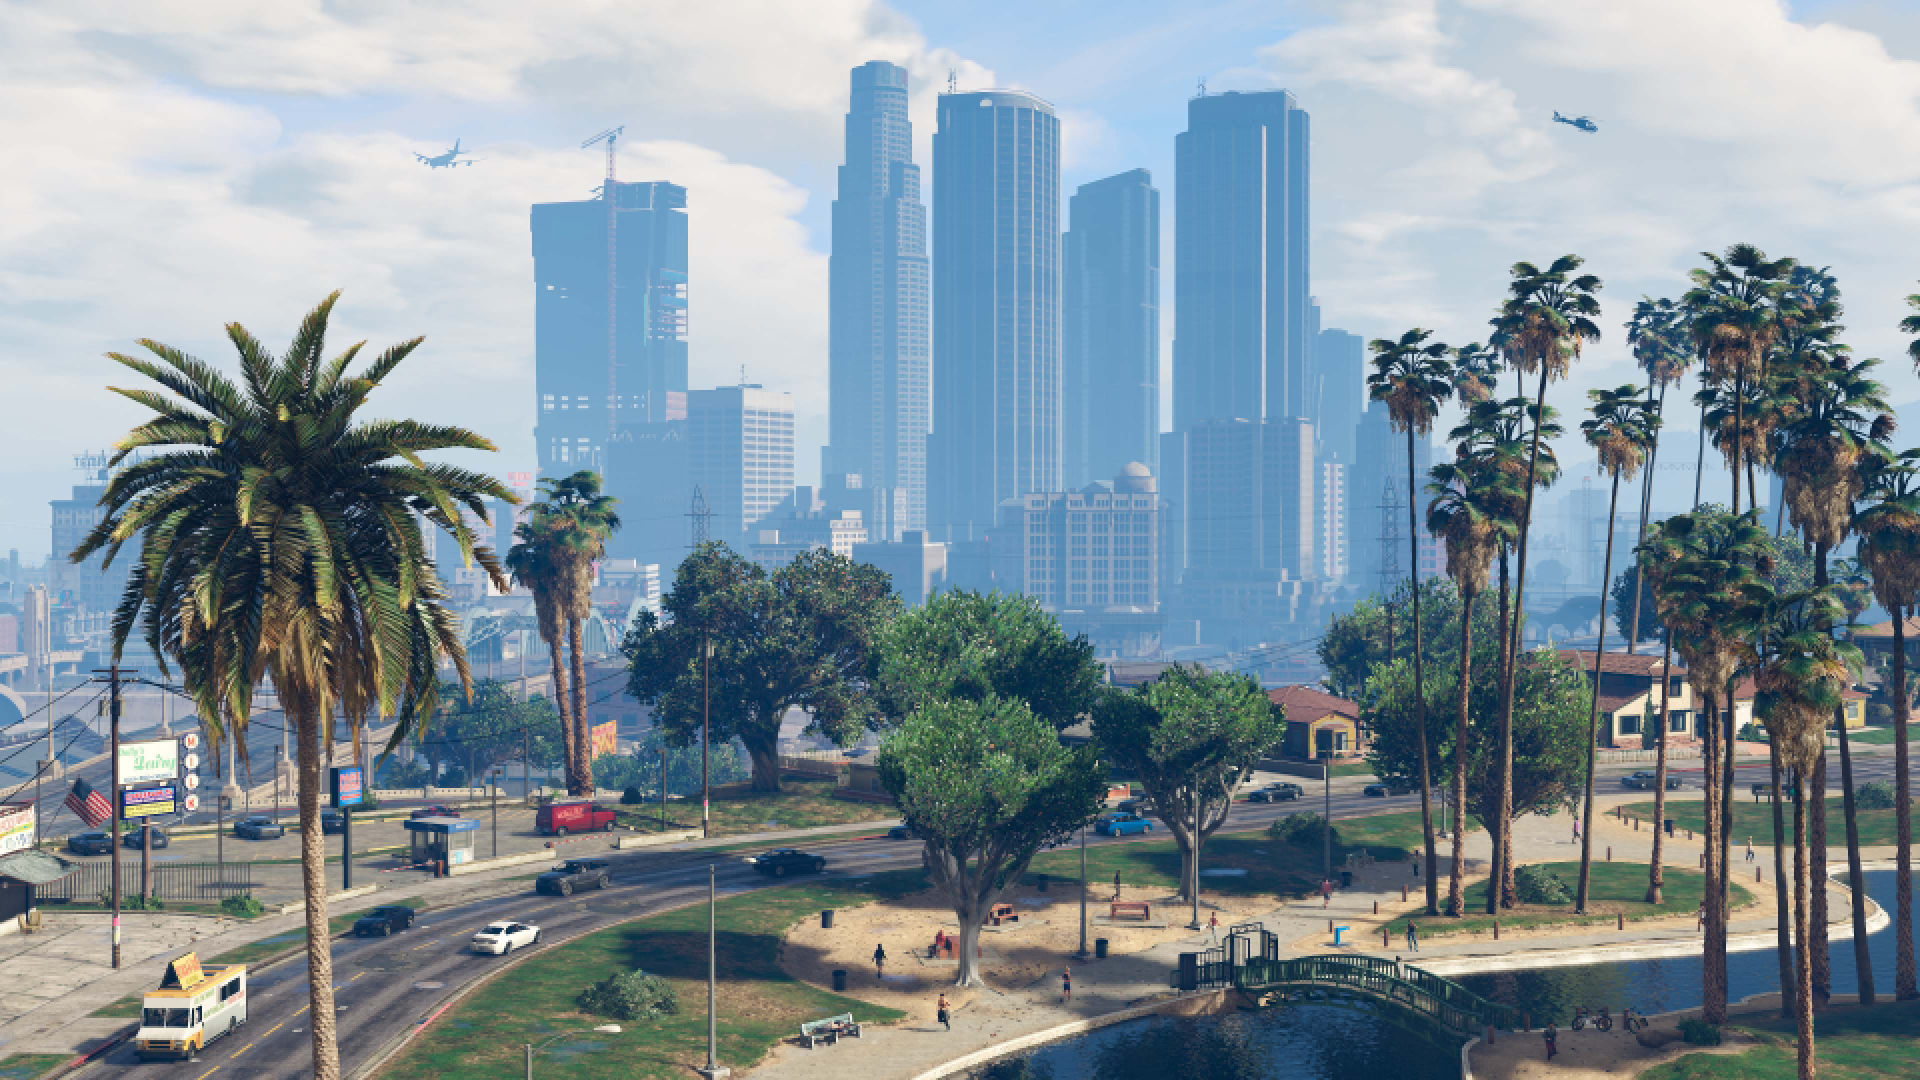 All GTA 6 Leaks: Release Date, New Map & Characters - 🌇 GTA-XTREME